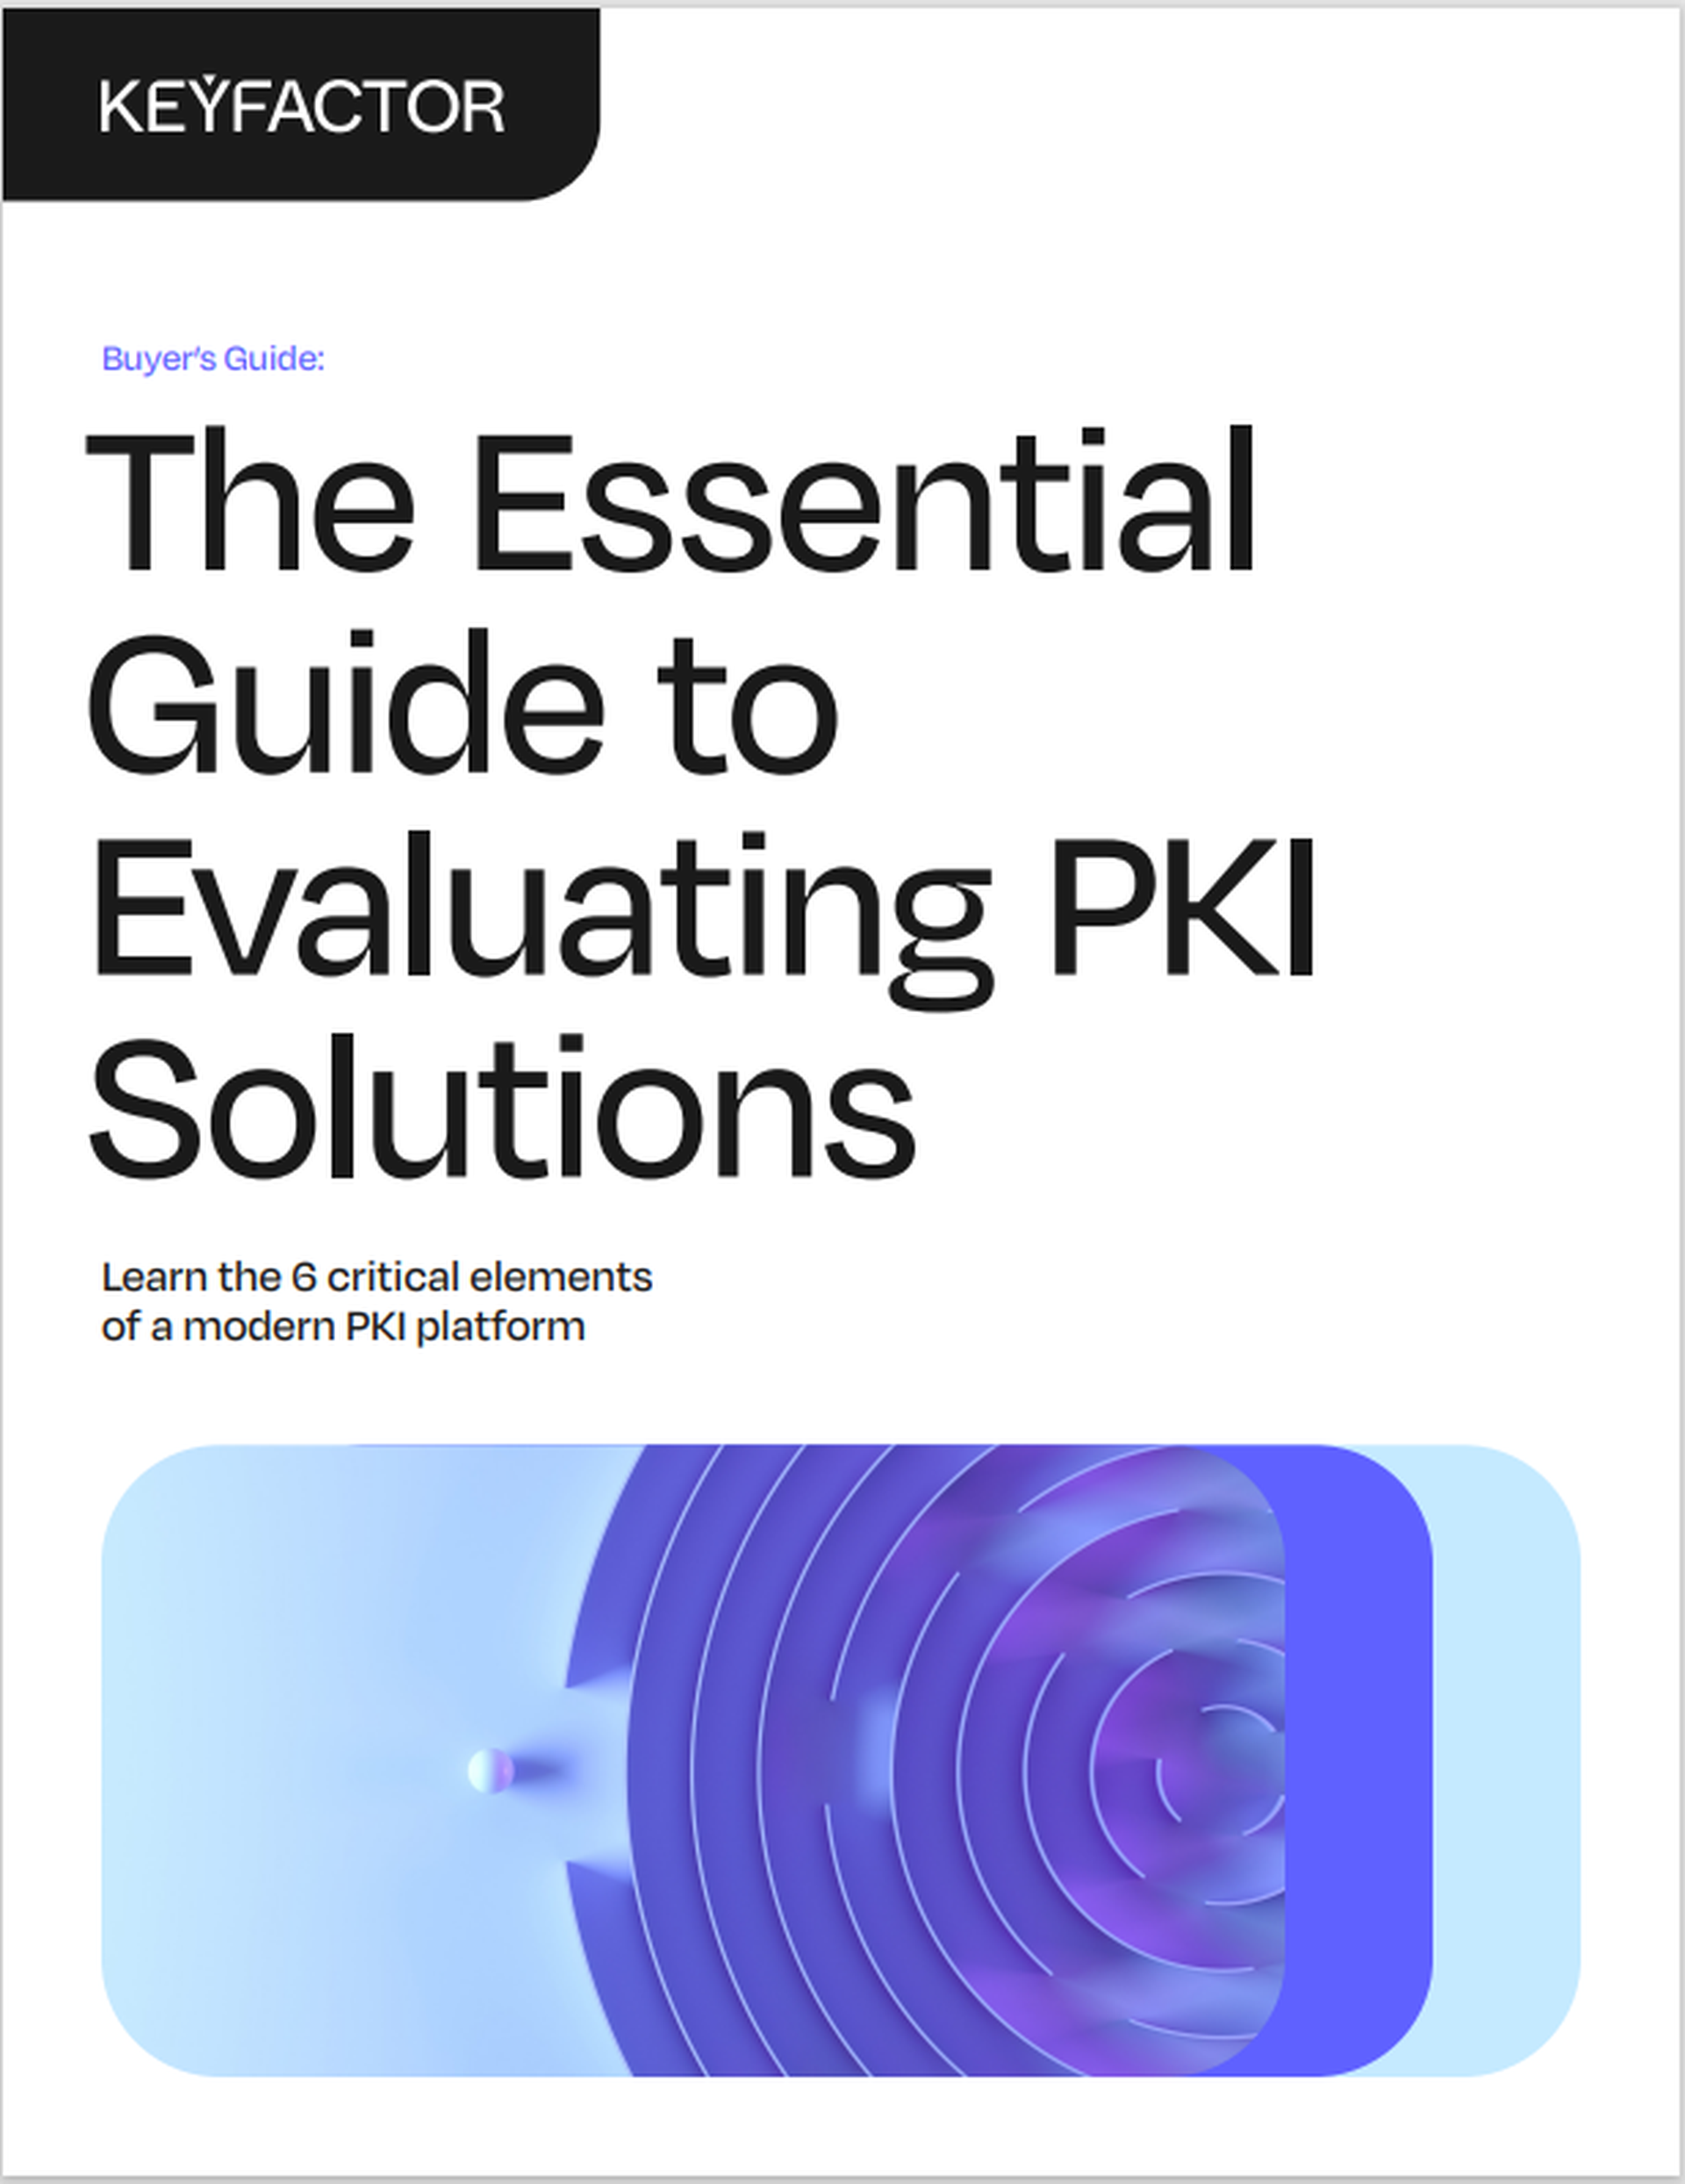 Buyer’s Guide: The Essential Guide to Evaluating PKI Solutions